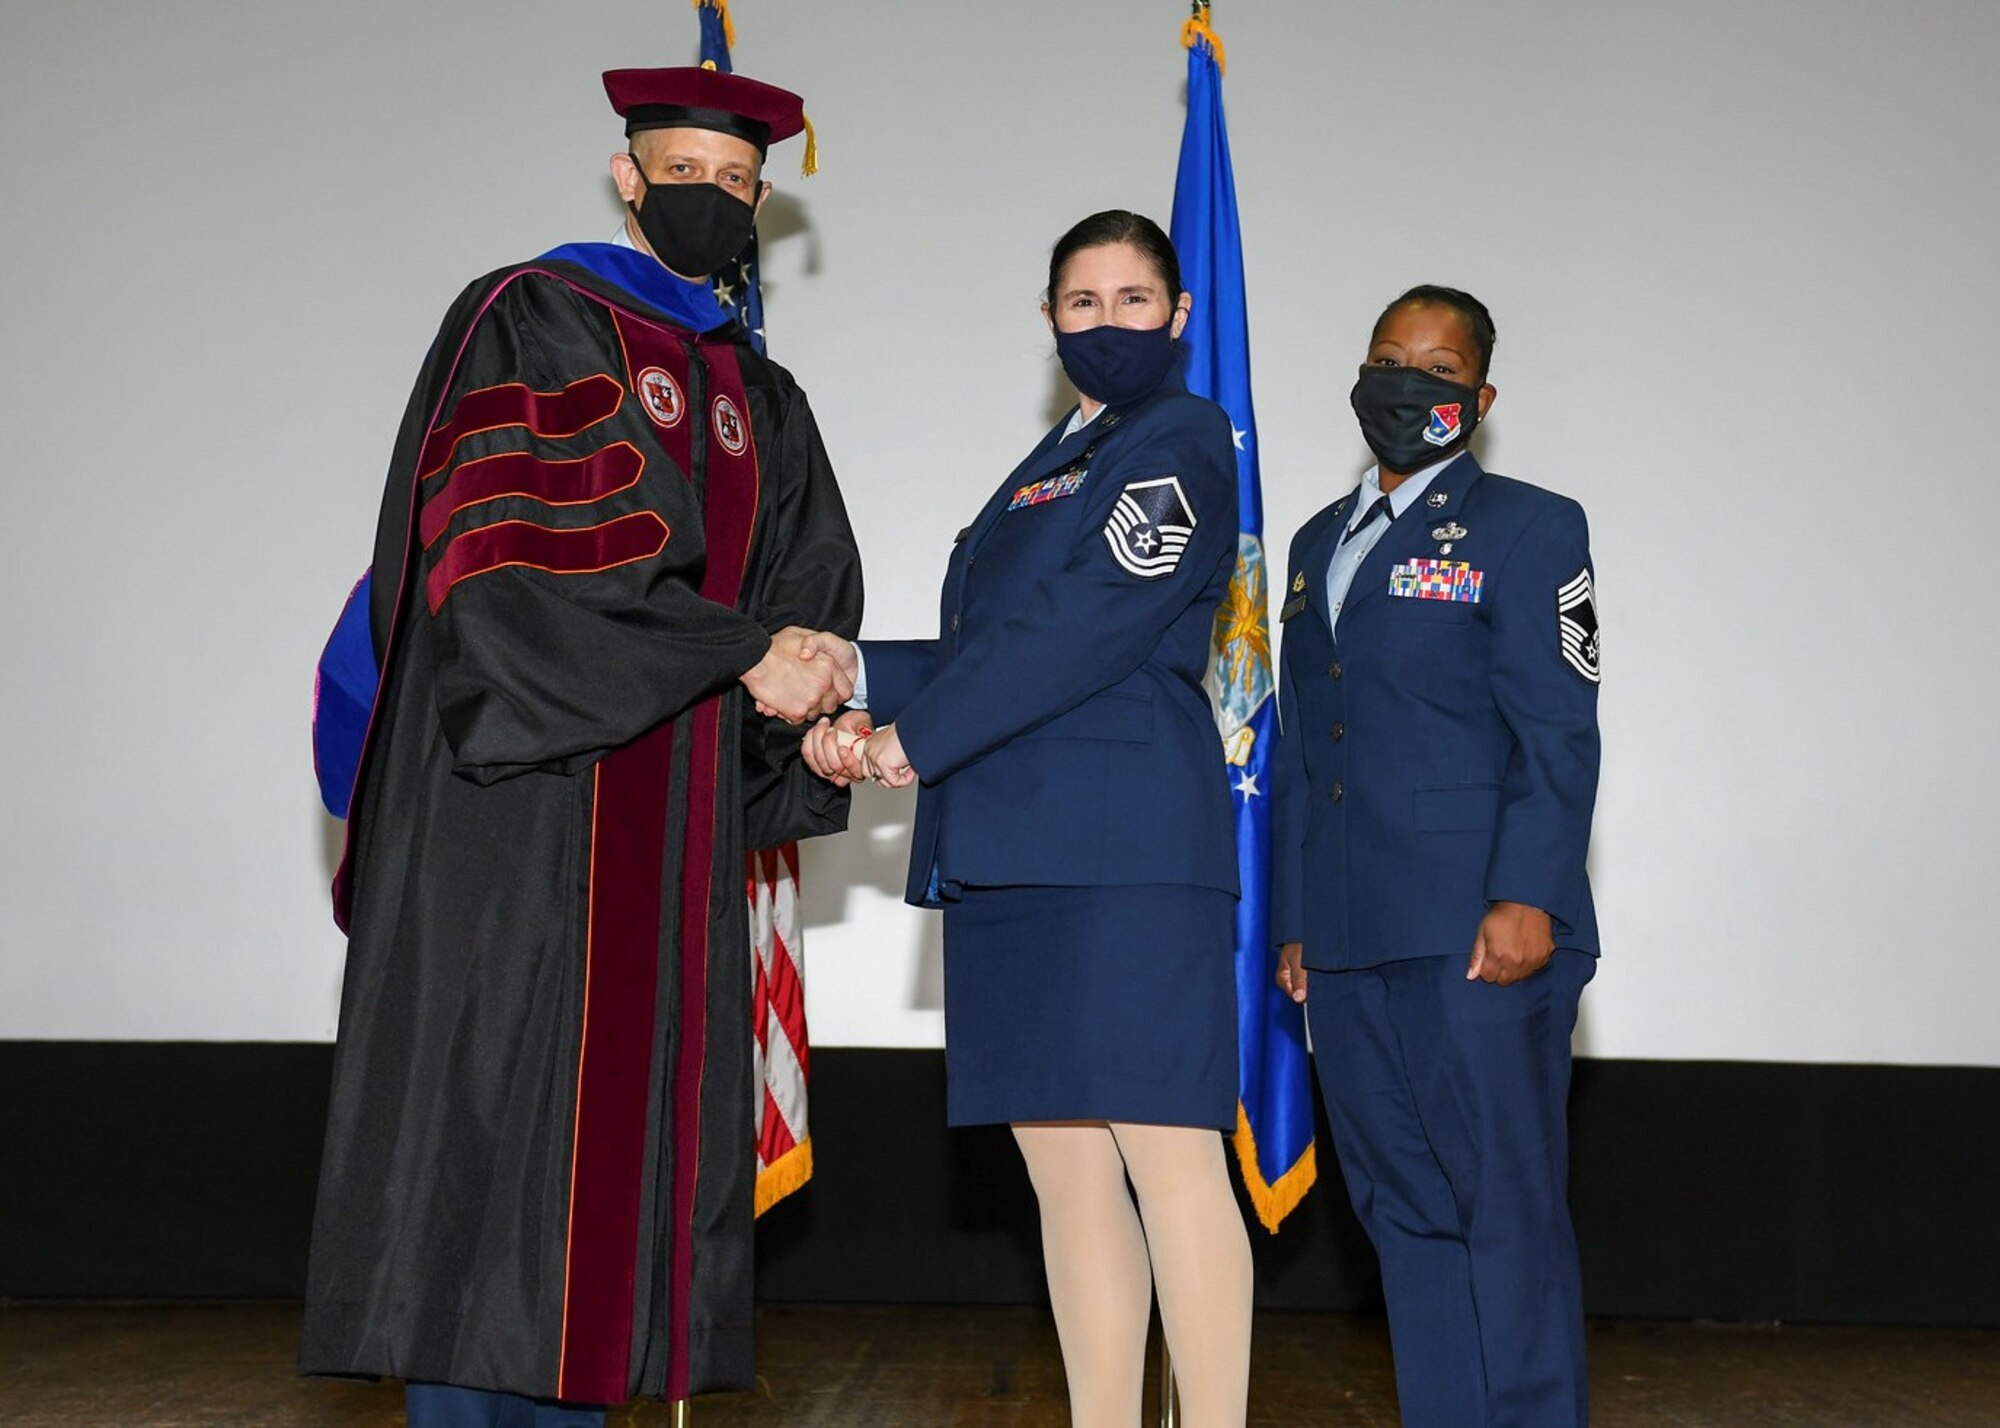 459th ARW NCOs graduate from CCAF
Master Sgt. Maria Clark of the 459th Aerospace Medicine Squadron and Master Sgt. Mary Ly of the 459th Maintenance Group graduated from the Community College of the Air Force during its ceremony held at the Joint Base Andrews theater on Oct. 21, 2021.